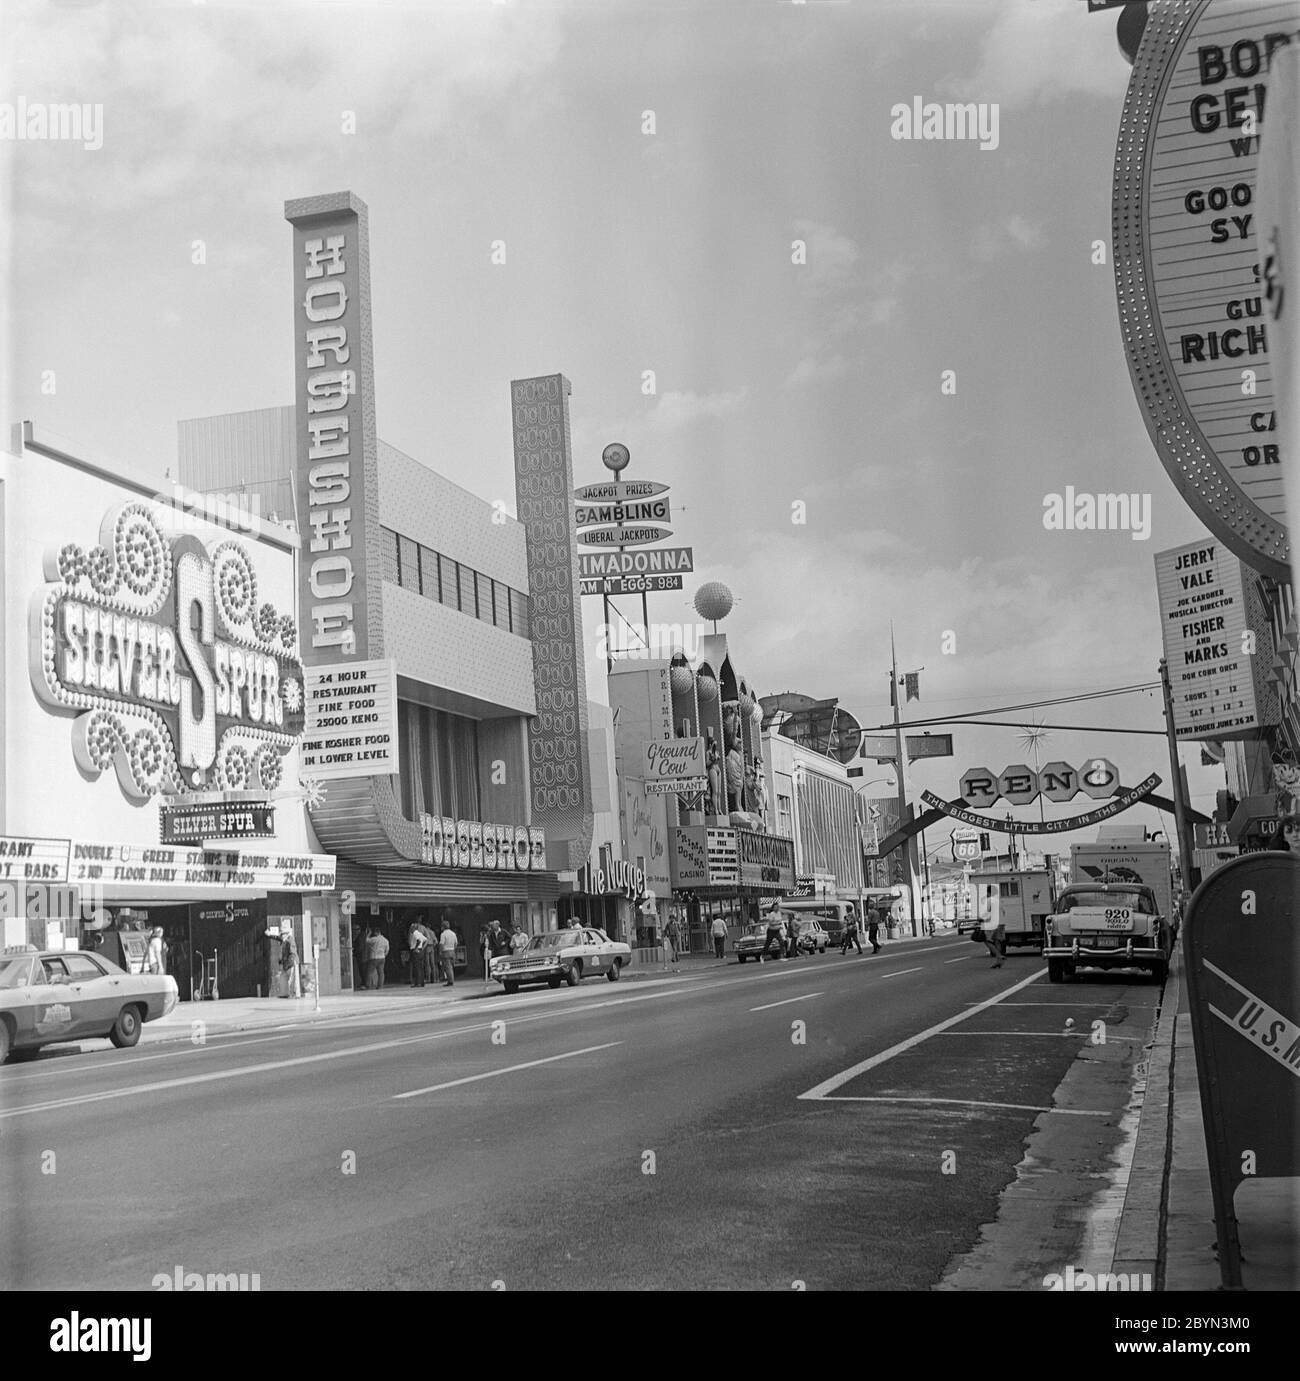 A vintage late 1960s or early 1970s black and white photograph showing the main street in Reno, Nevada, USA. Signs for casinos called The Silver Spur, The Horseshoe, The Prima Donna. Stock Photo